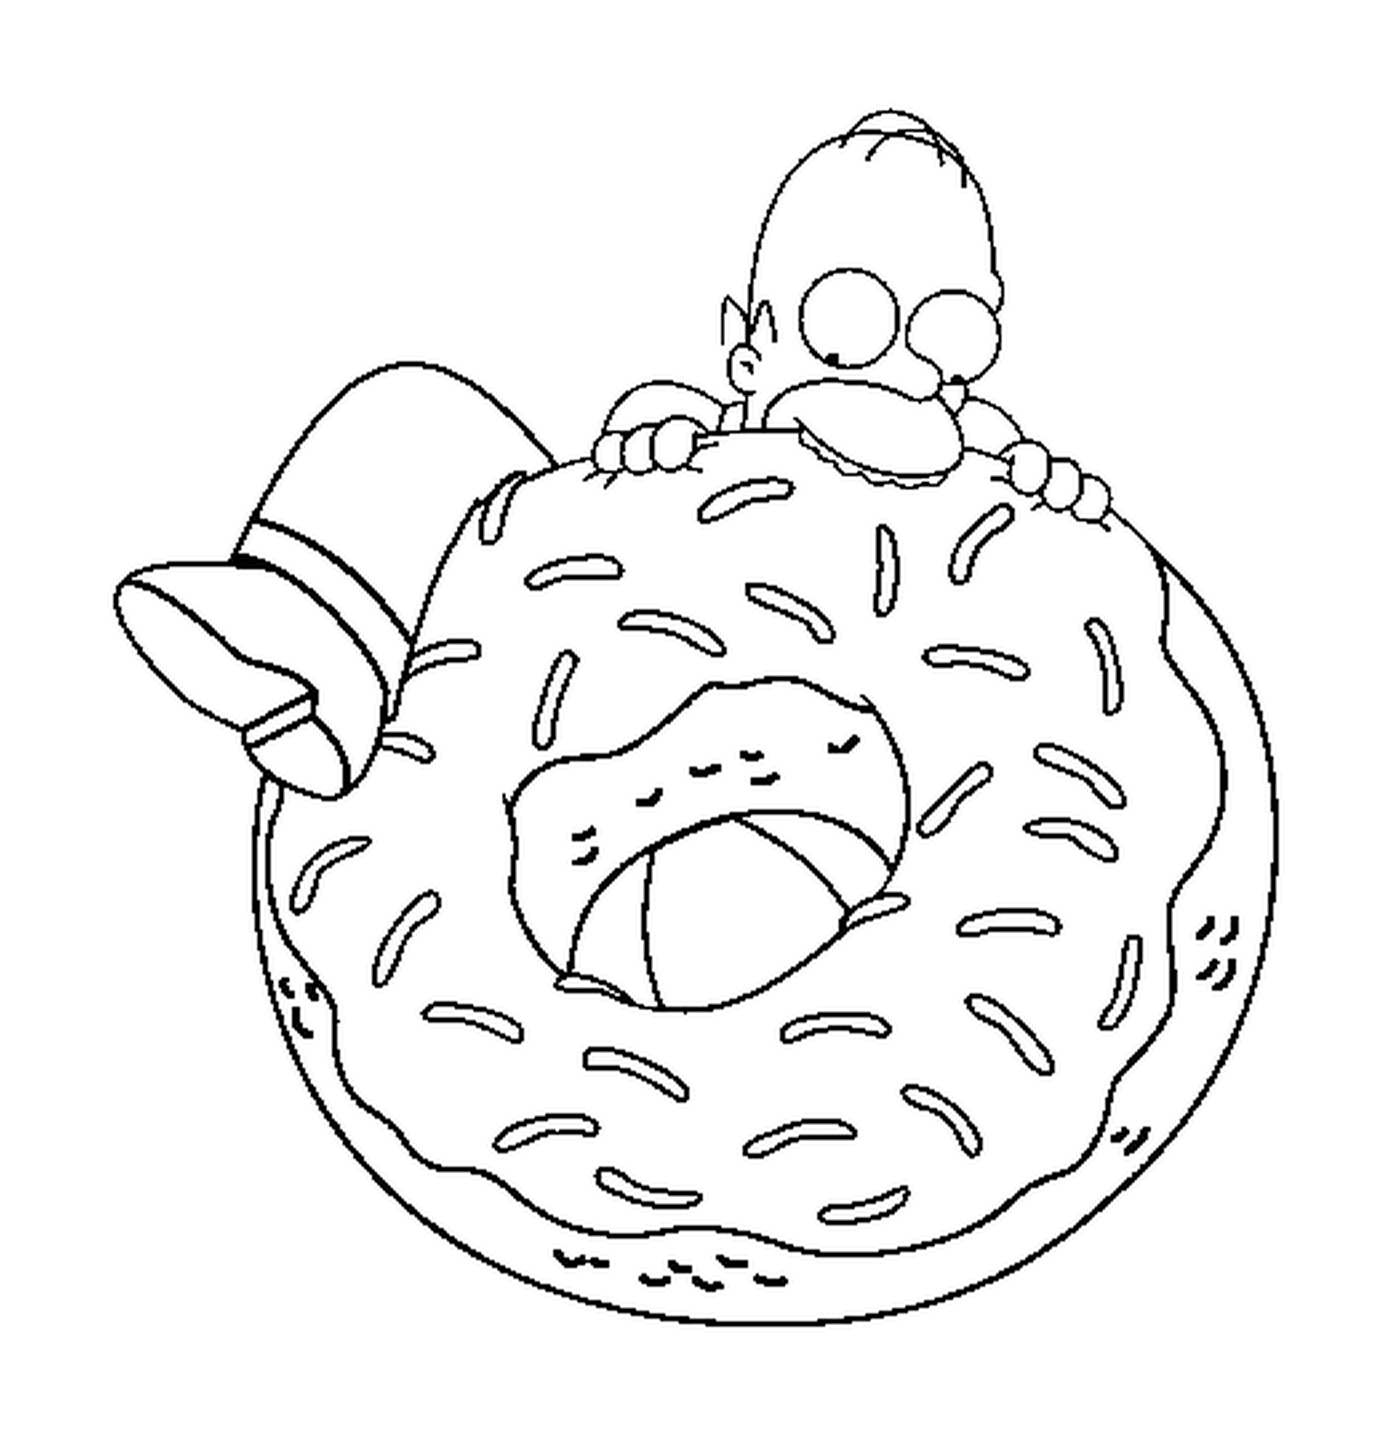  Homer tries to eat a huge donut 